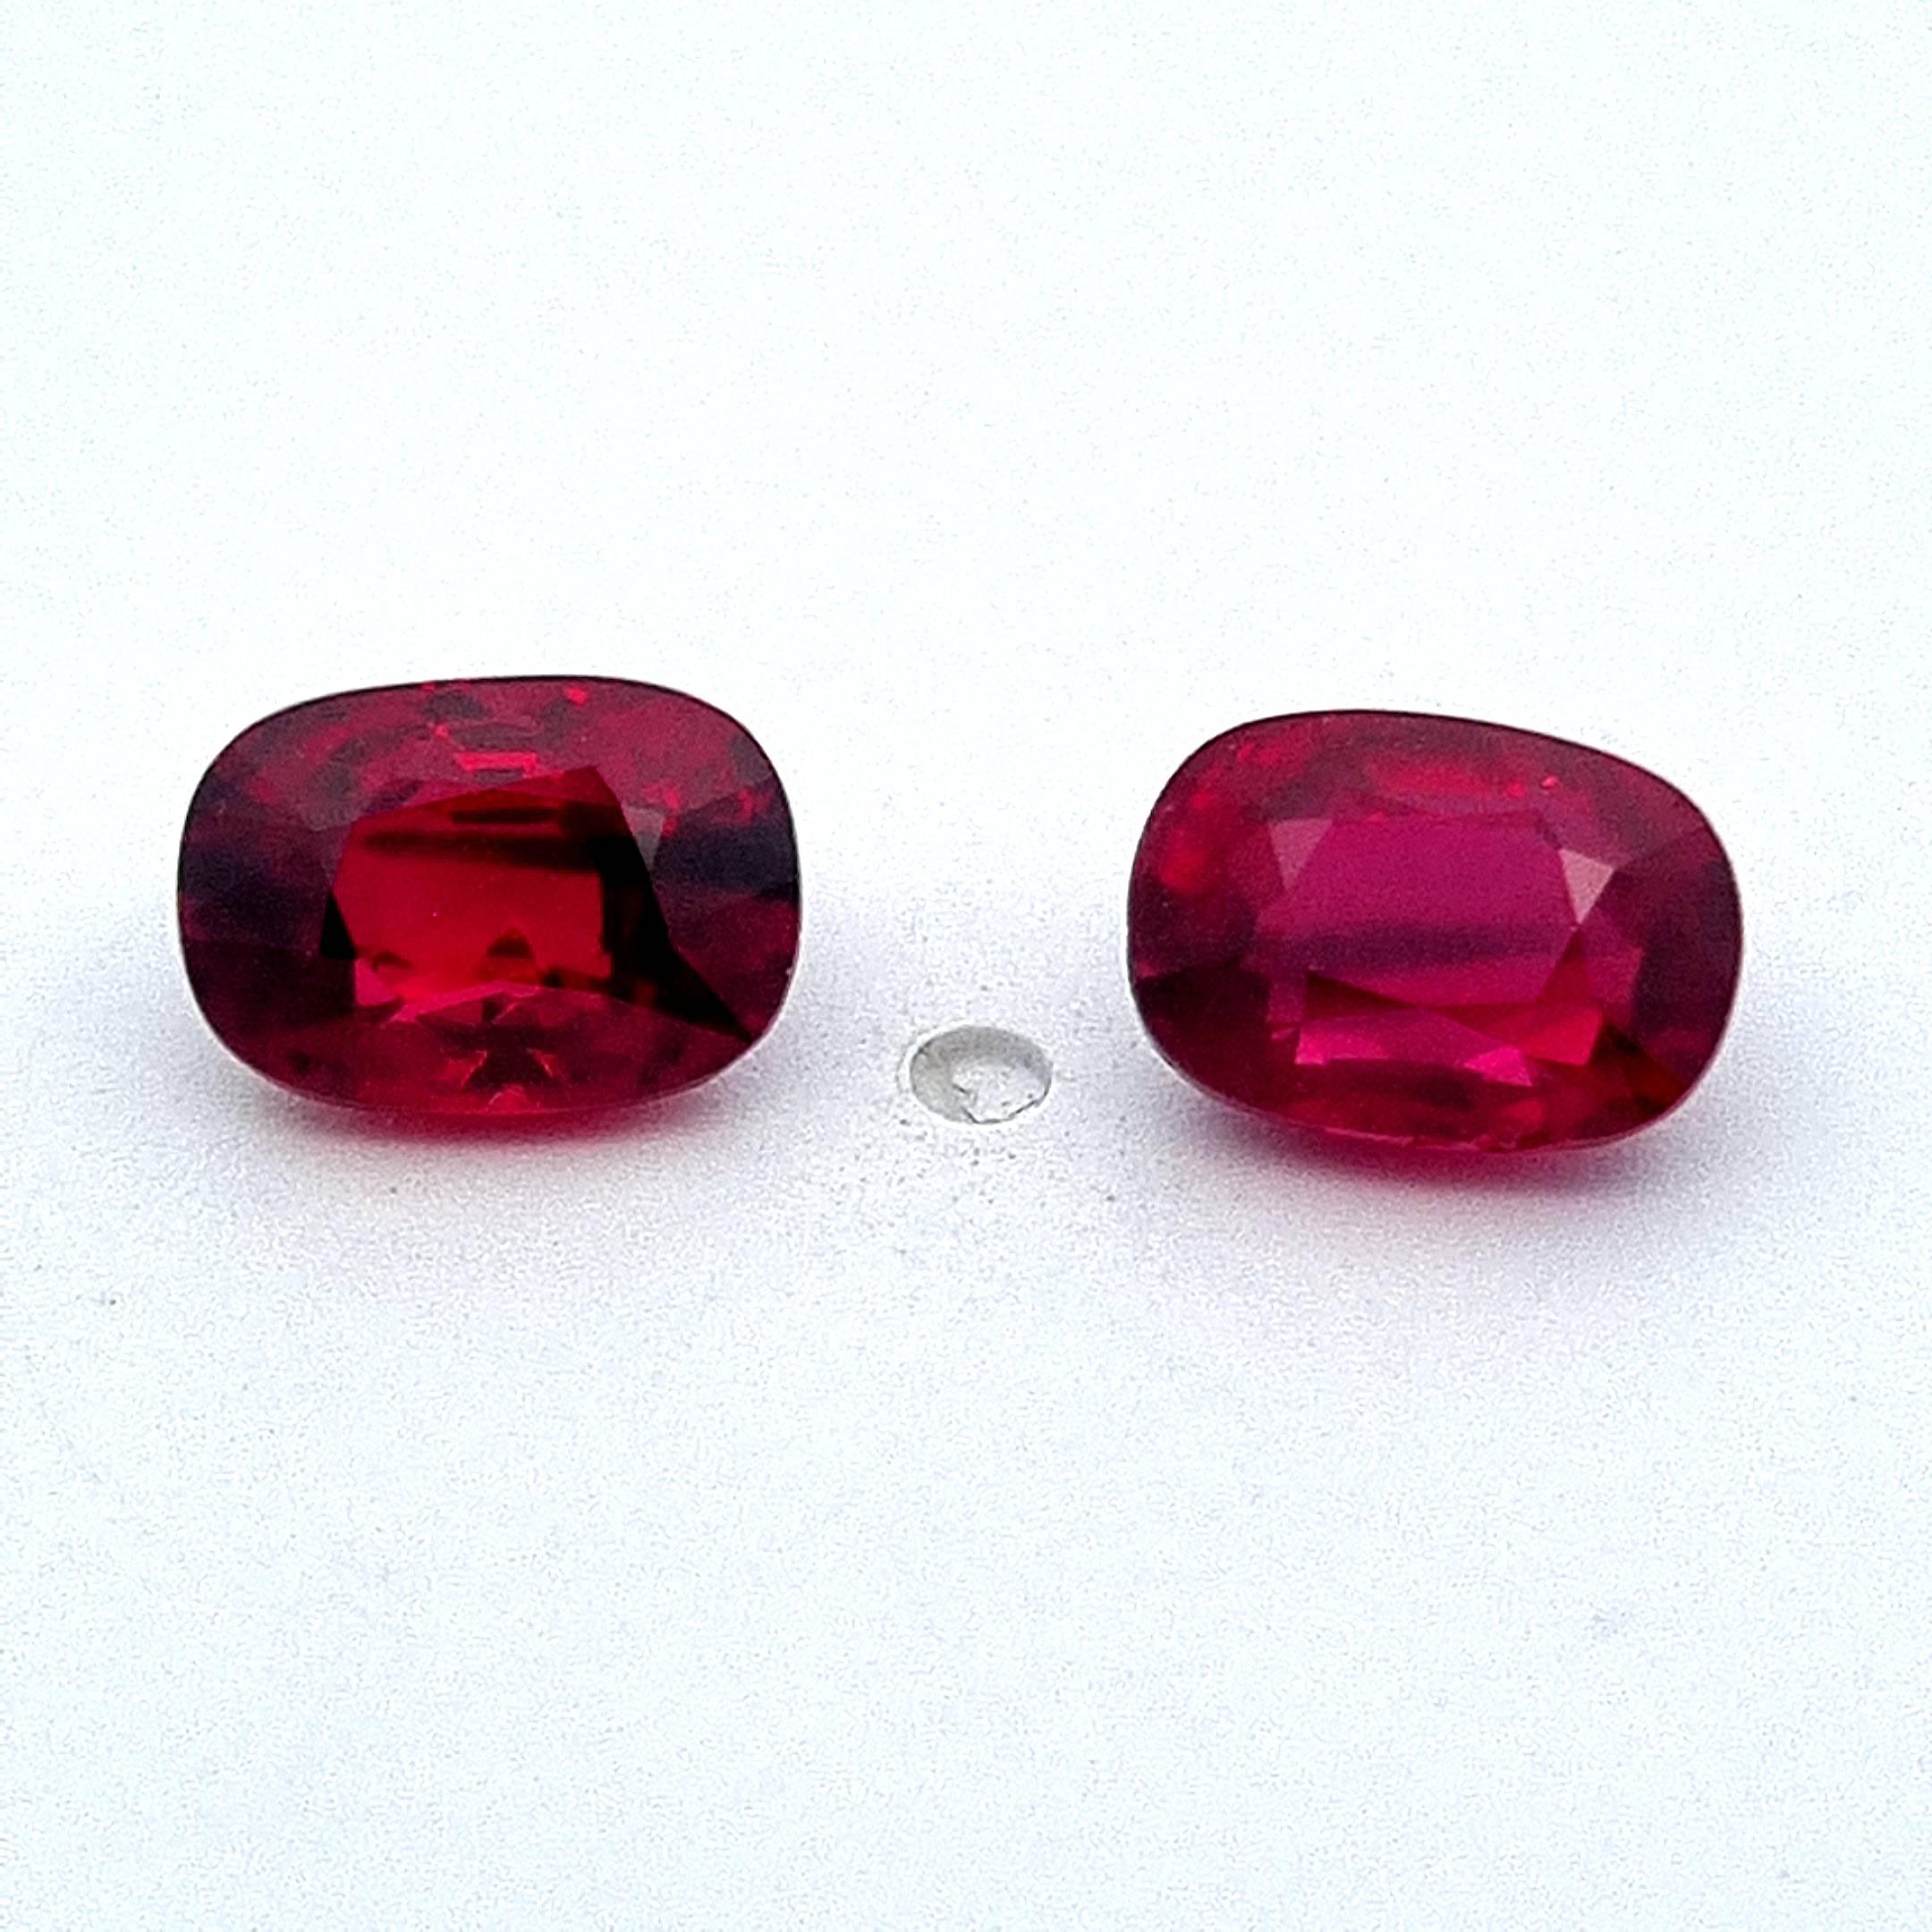 A fine pair of 1 carat each 'Pigeons Blood' unheated rubies. 

These Cushion cut rubies are certified by the GRS as originating from Burma (Myanmar) with no thermal enhancement (unheated), and have the prestigious color grade of 'Pigeons Blood'